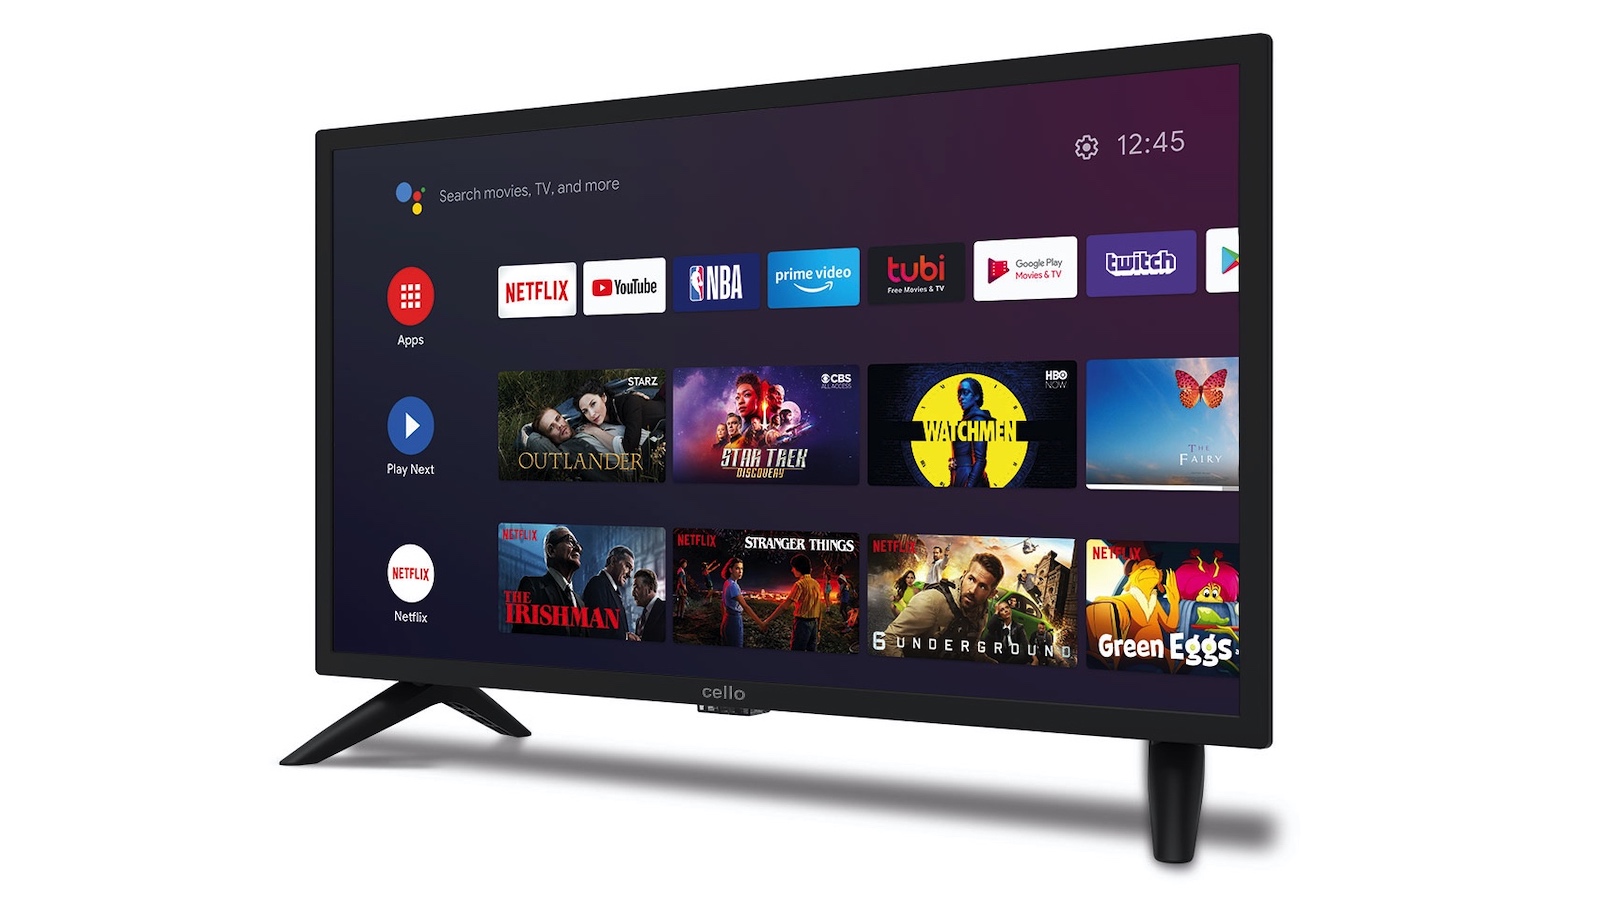 32-inch Cello smart TV with Android TV platform